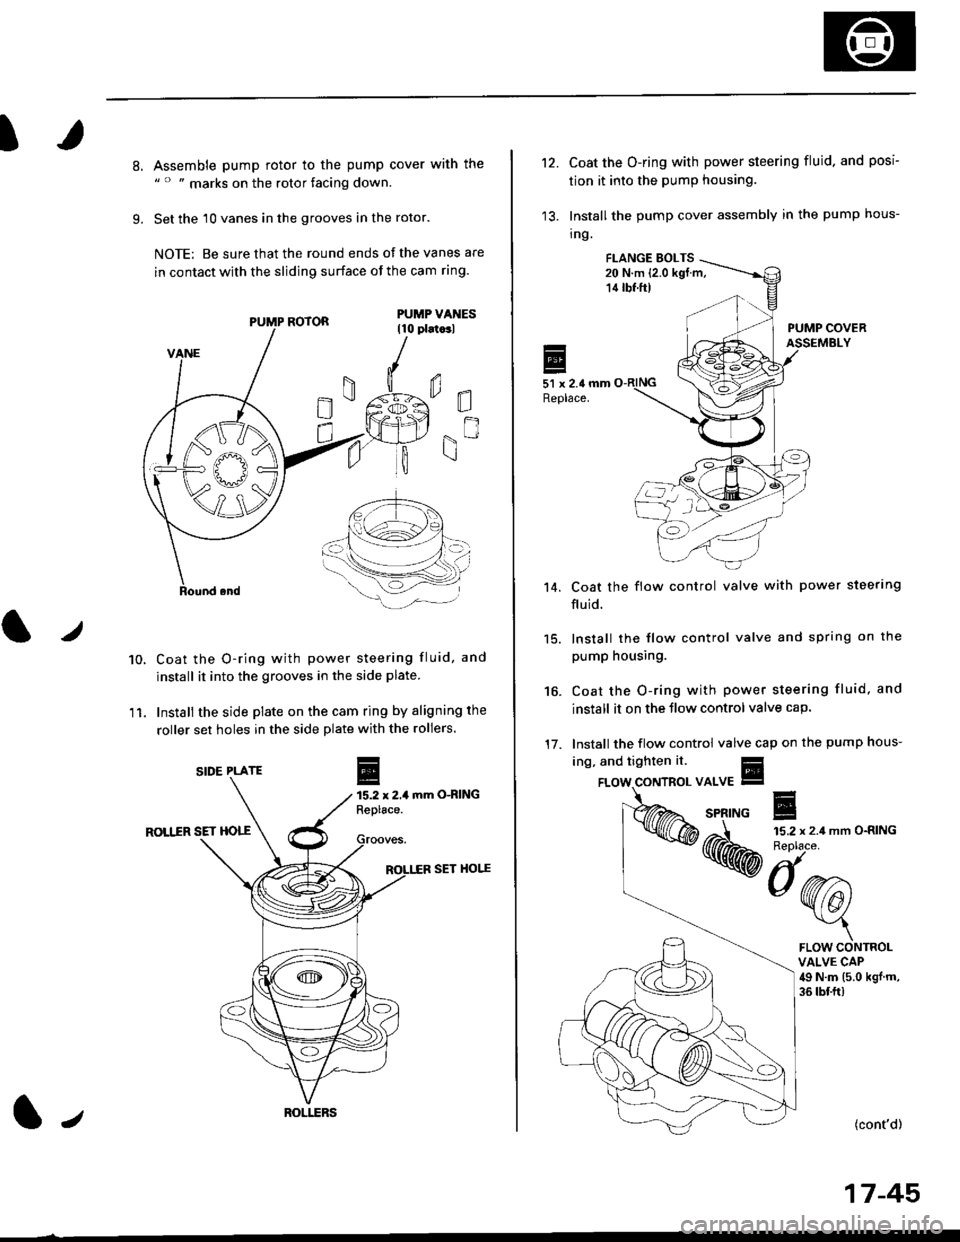 HONDA CIVIC 1996 6.G Workshop Manual I
8.
9.
Assemble pump rotor to the pump cover with the" " " marks on the rotor facing down.
Set the 10 vanes in the grooves in the rotor.
NOTE: Be sure that the round ends ot the vanes are
in contact 